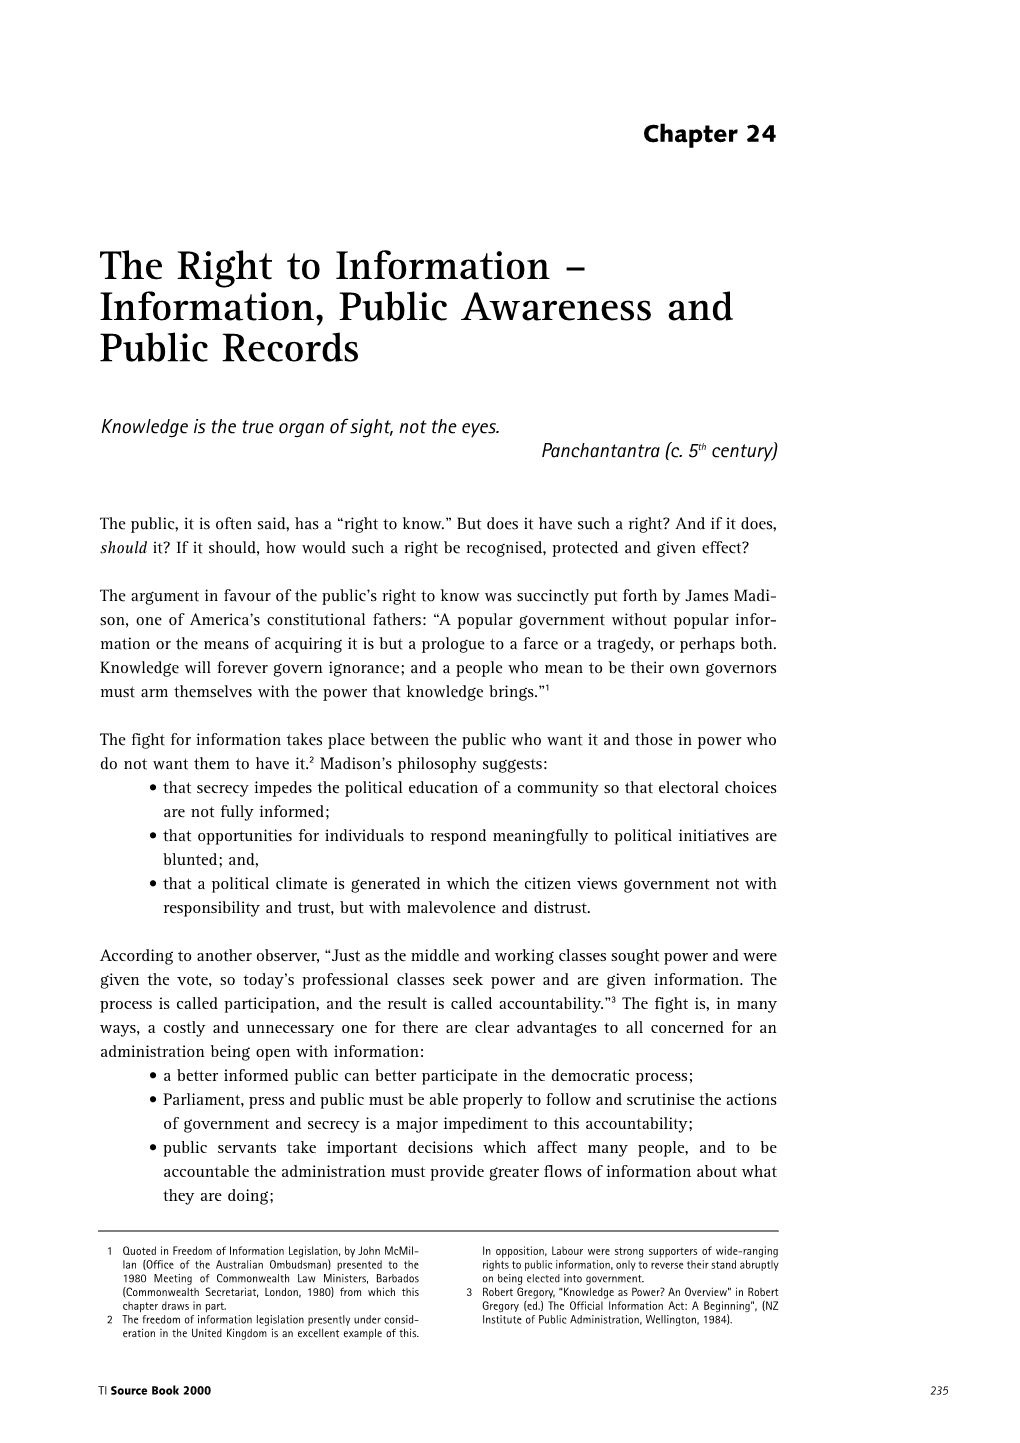 Information, Public Awareness and Public Records